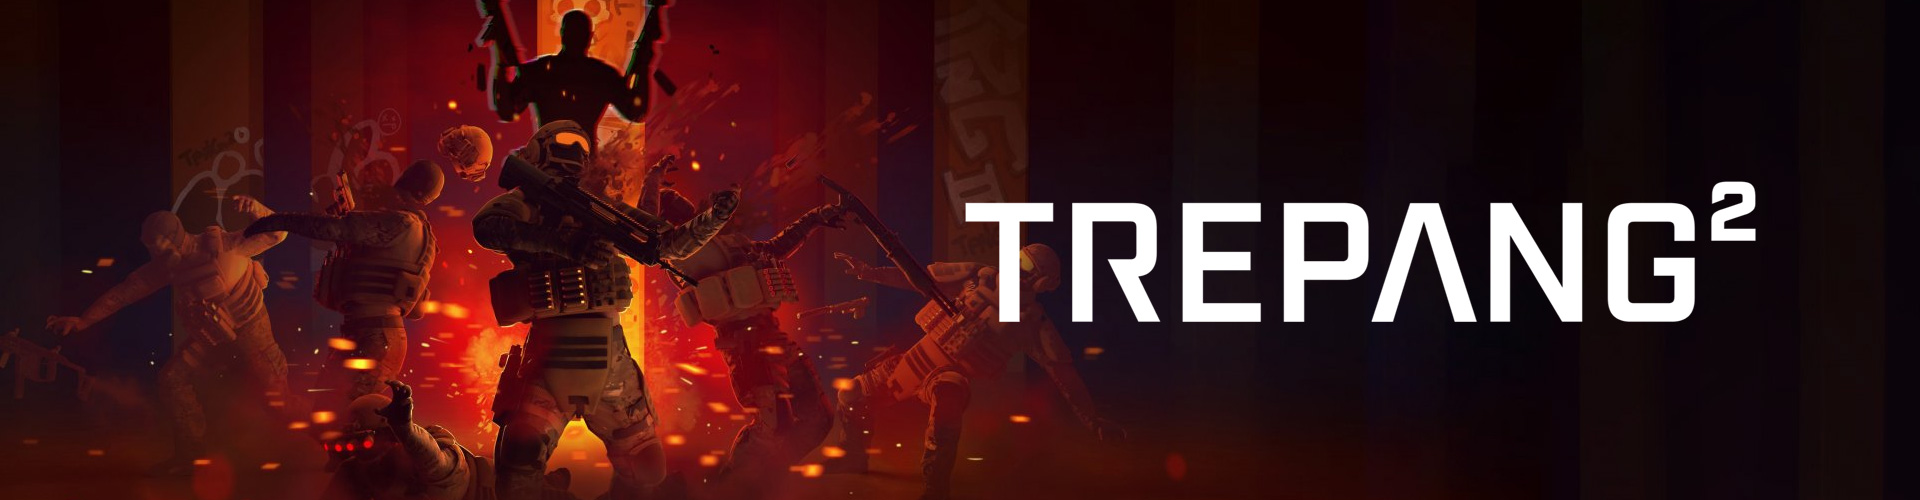 Trepang2: a gory FPS with bullet time